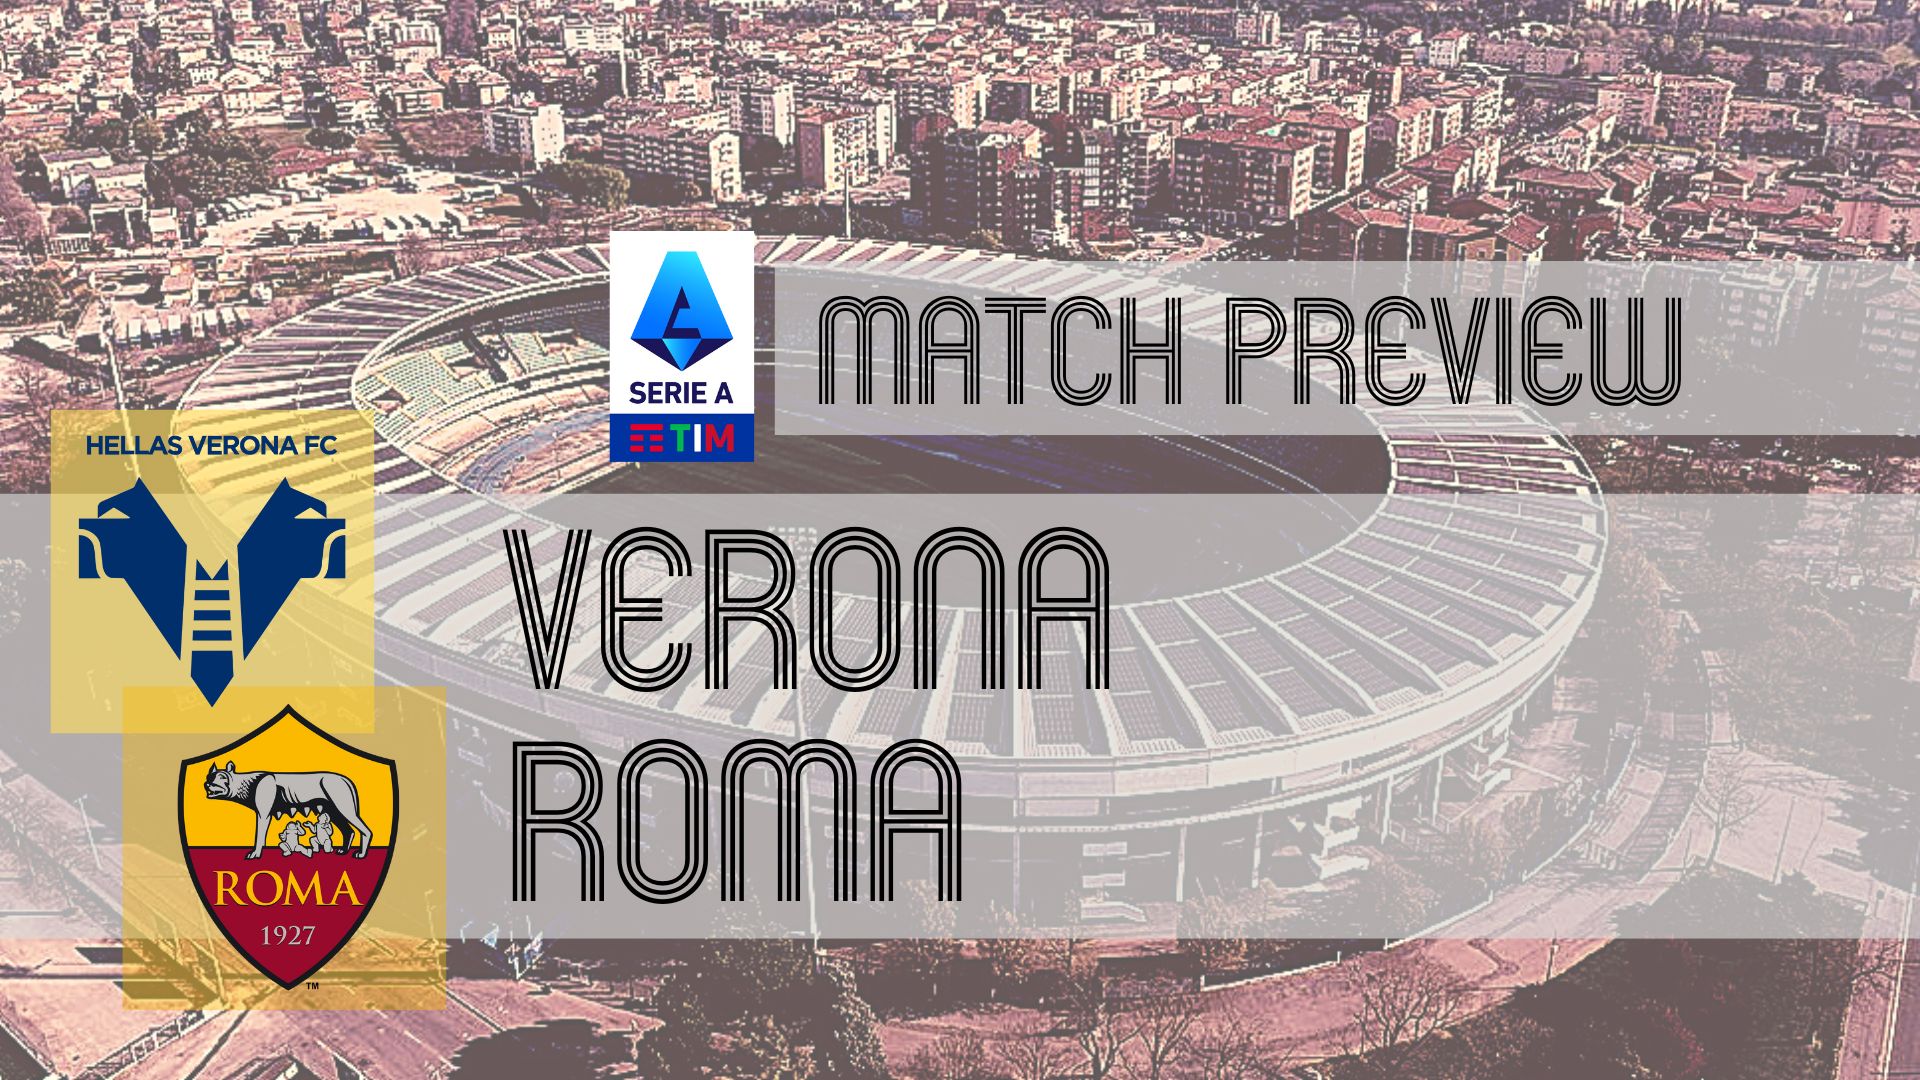 Ticket information: Opening home games against Genoa and Sassuolo - AS Roma